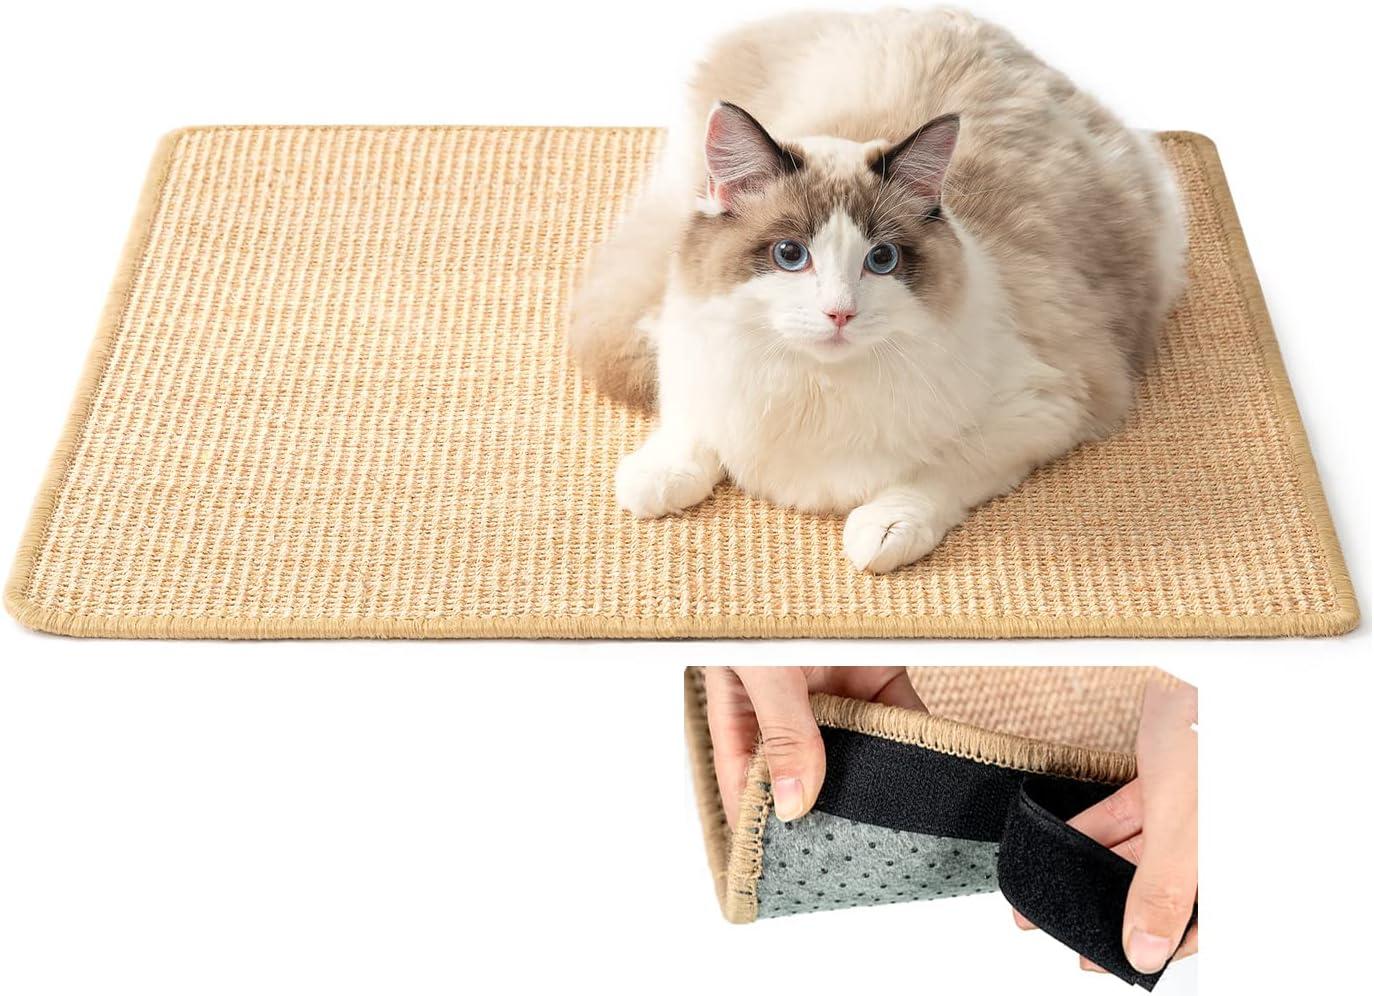 Cat Scratching Pad with Adhesive Hook Tape for $6.99